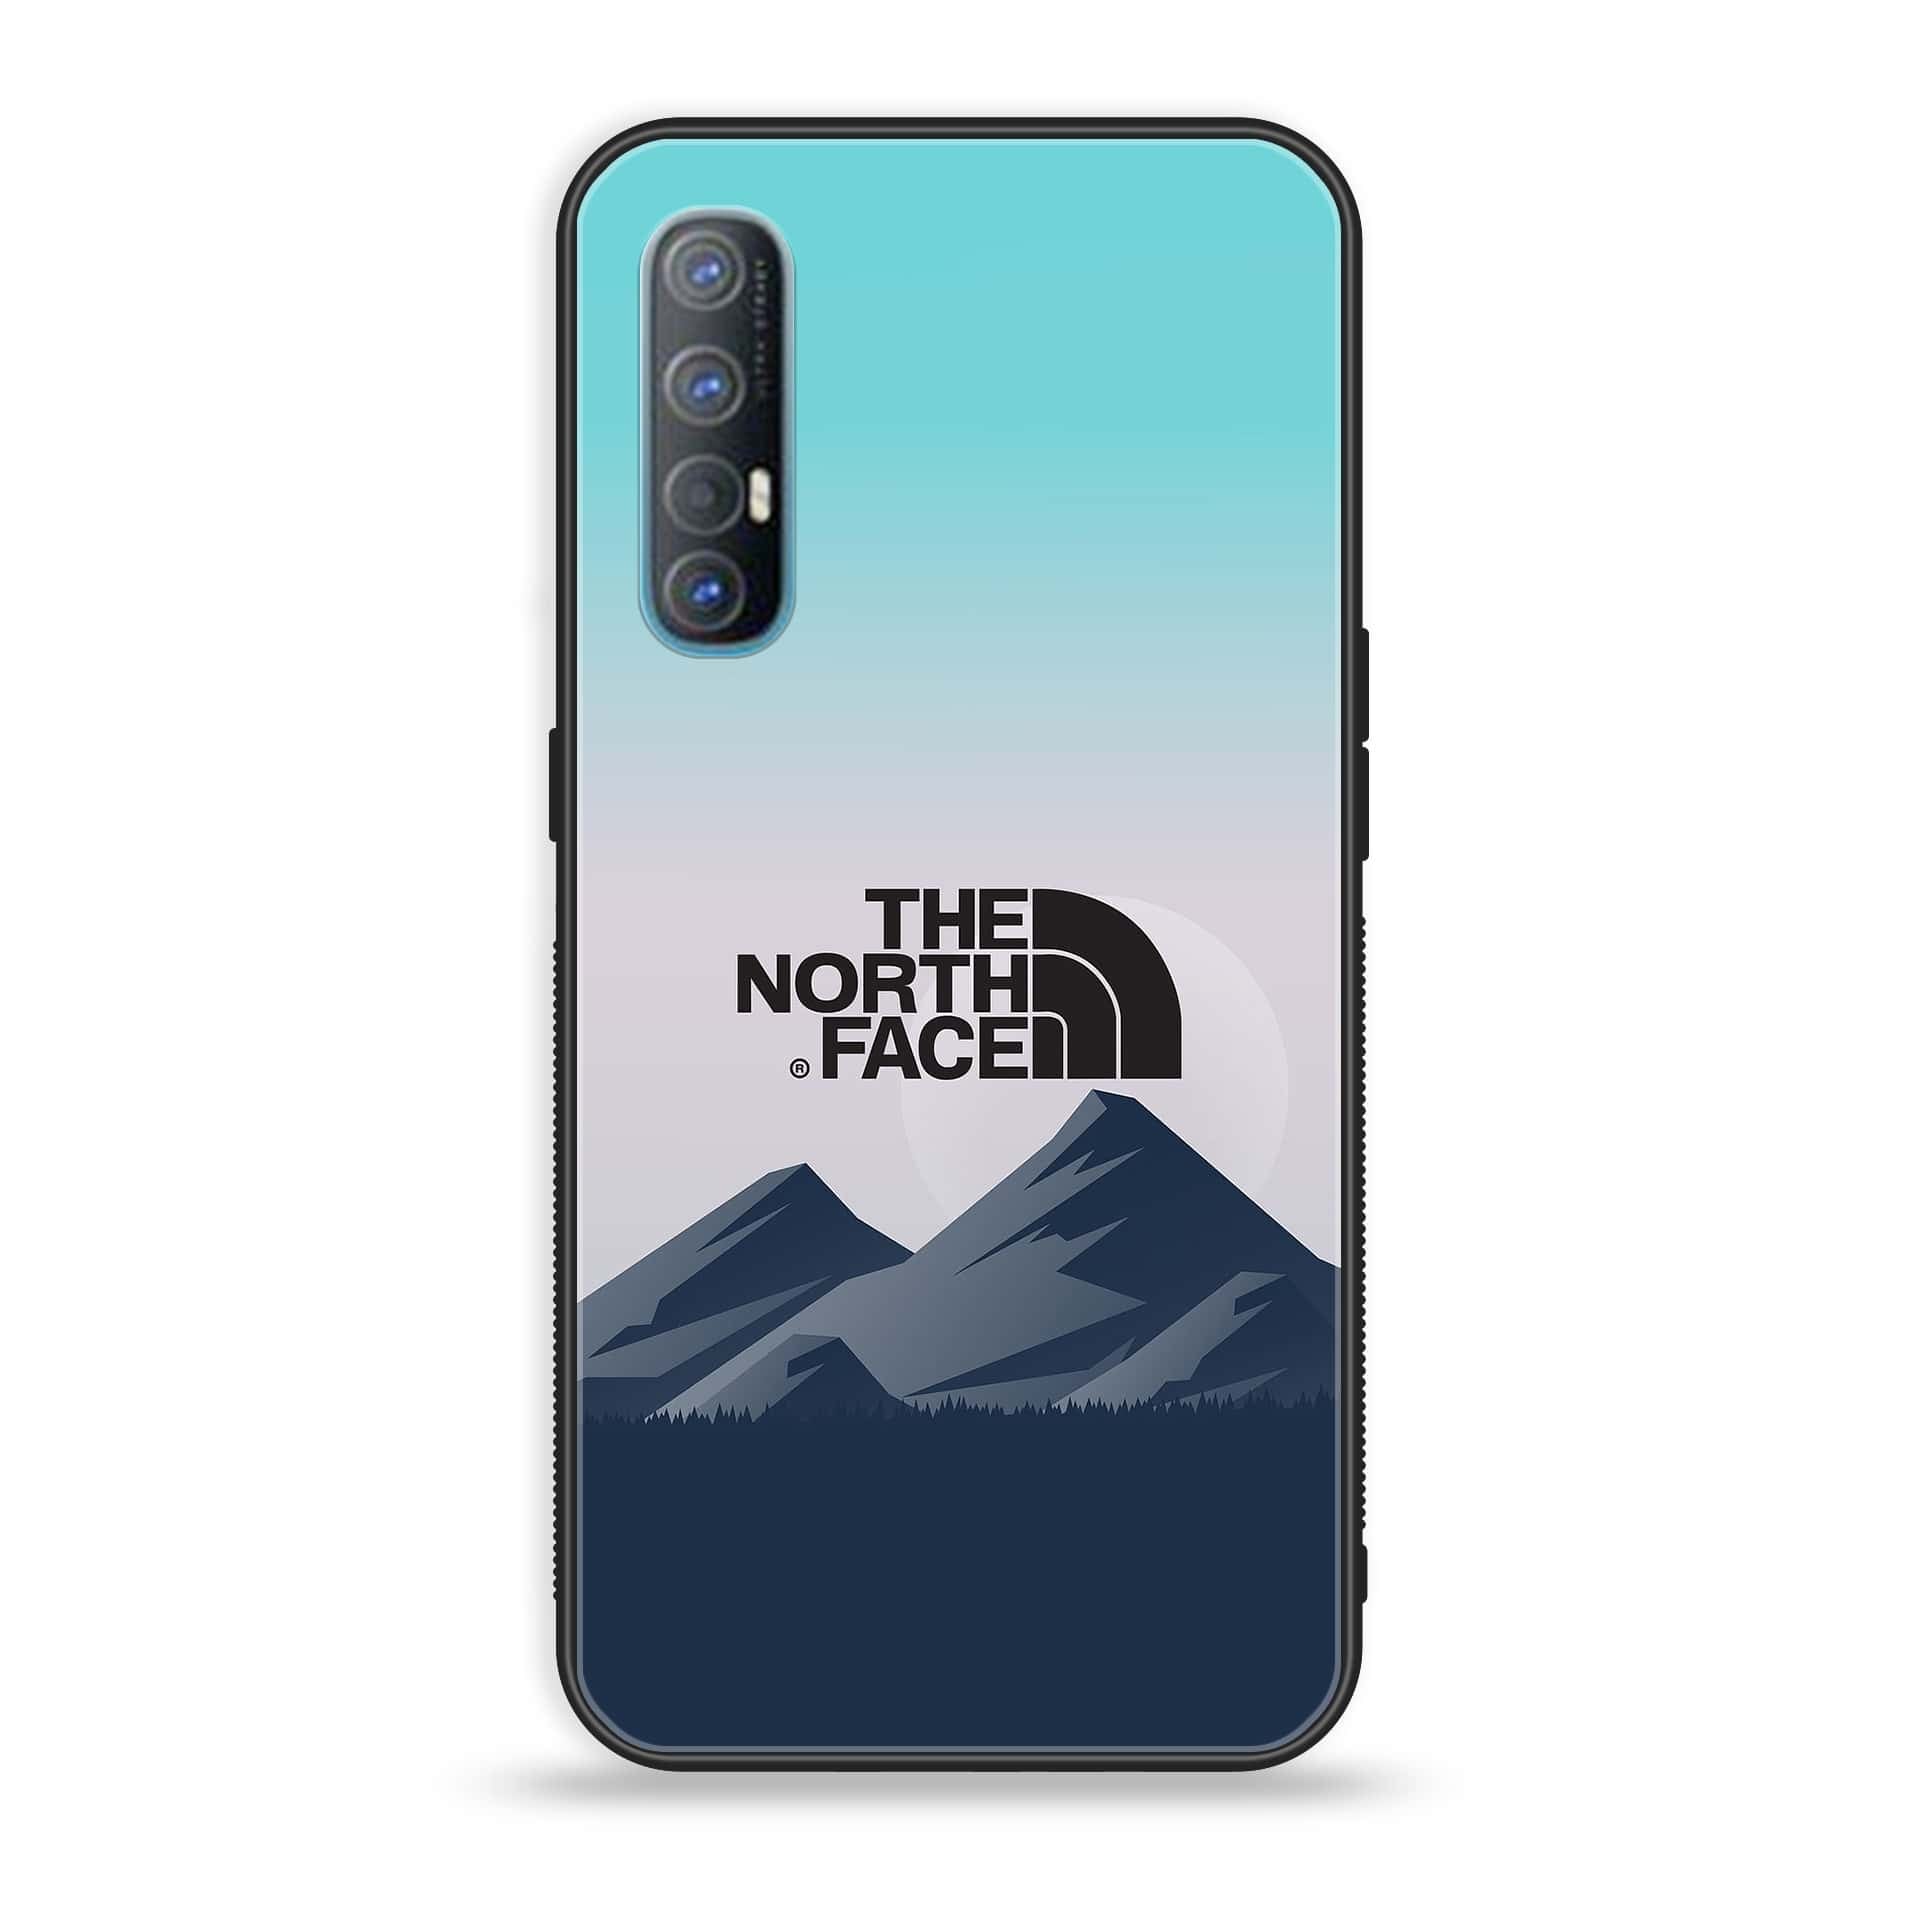 Oppo Find X2 Neo - The North Face Series - Premium Printed Glass soft Bumper shock Proof Case